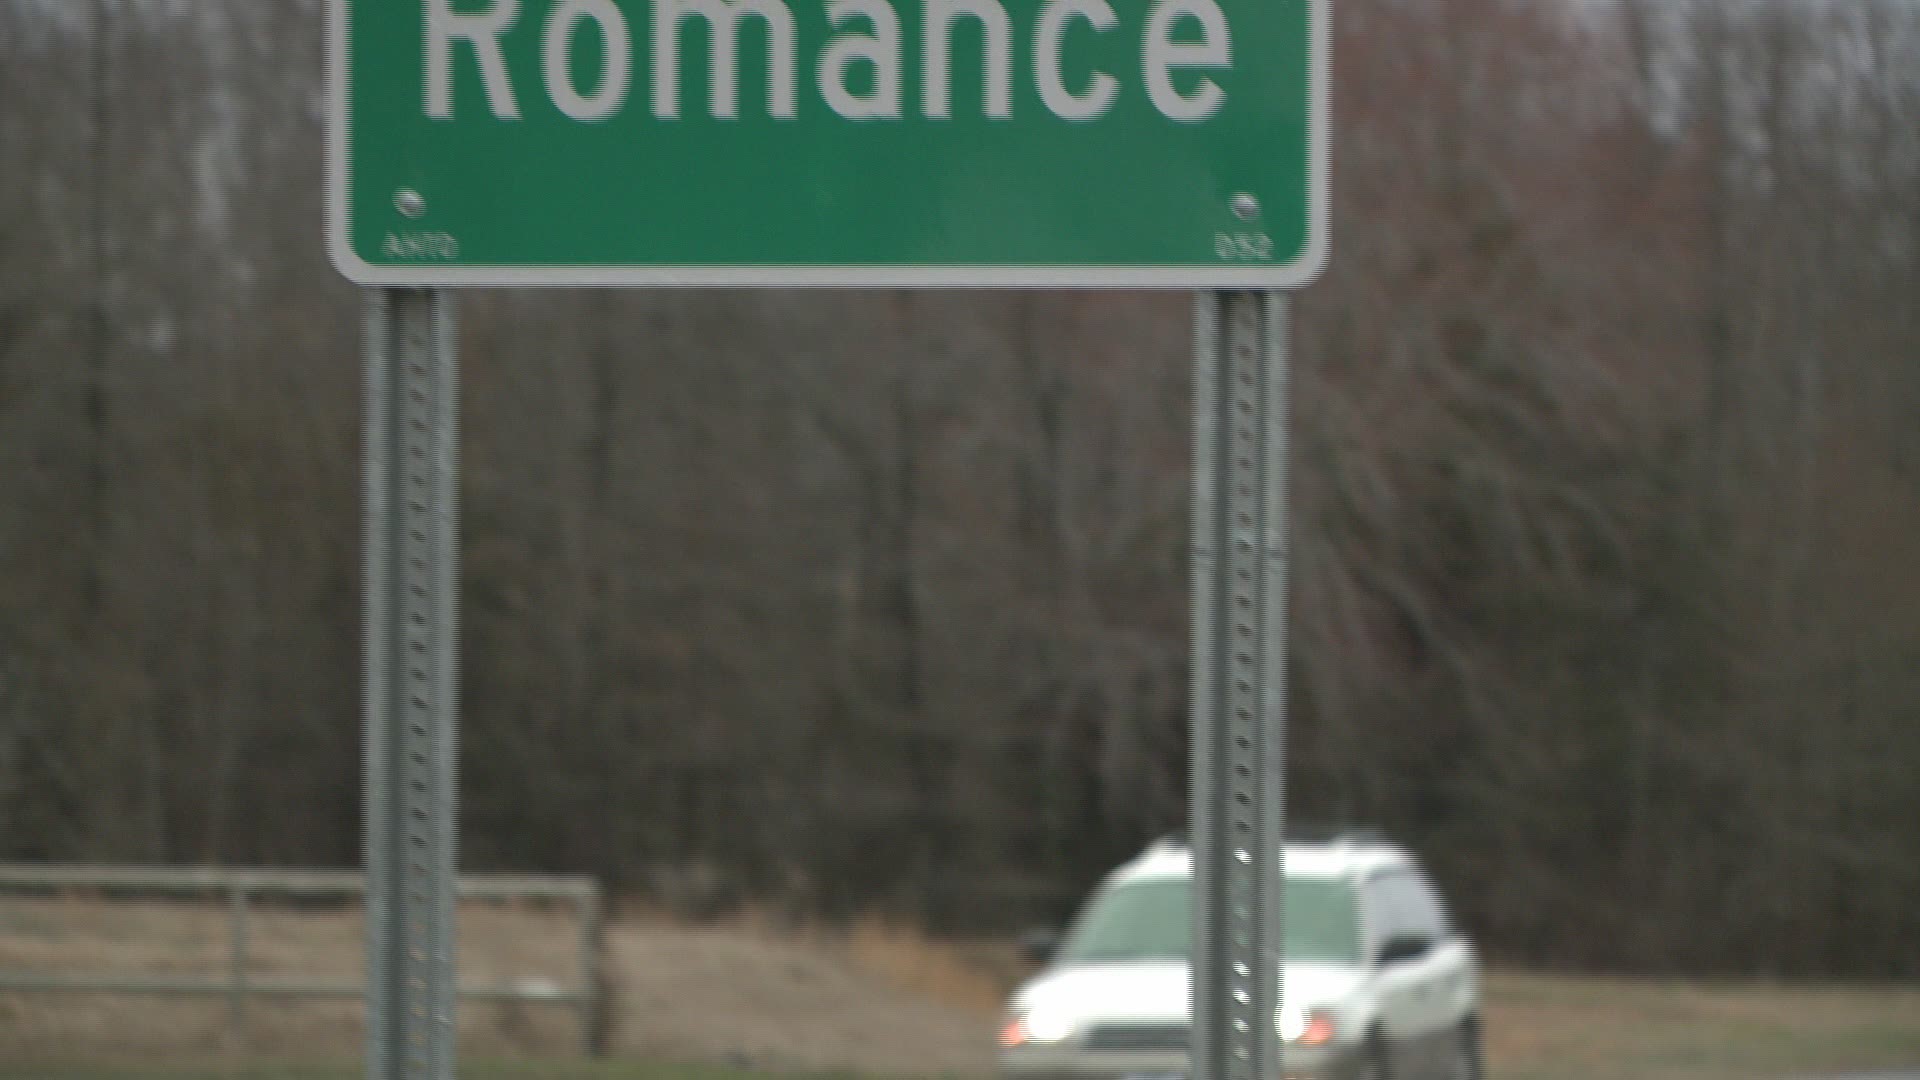 When you think of romantic places, Romance, Arkansas probably doesn’t come to mind. But this little town in Arkansas has big heart and is known around the world.